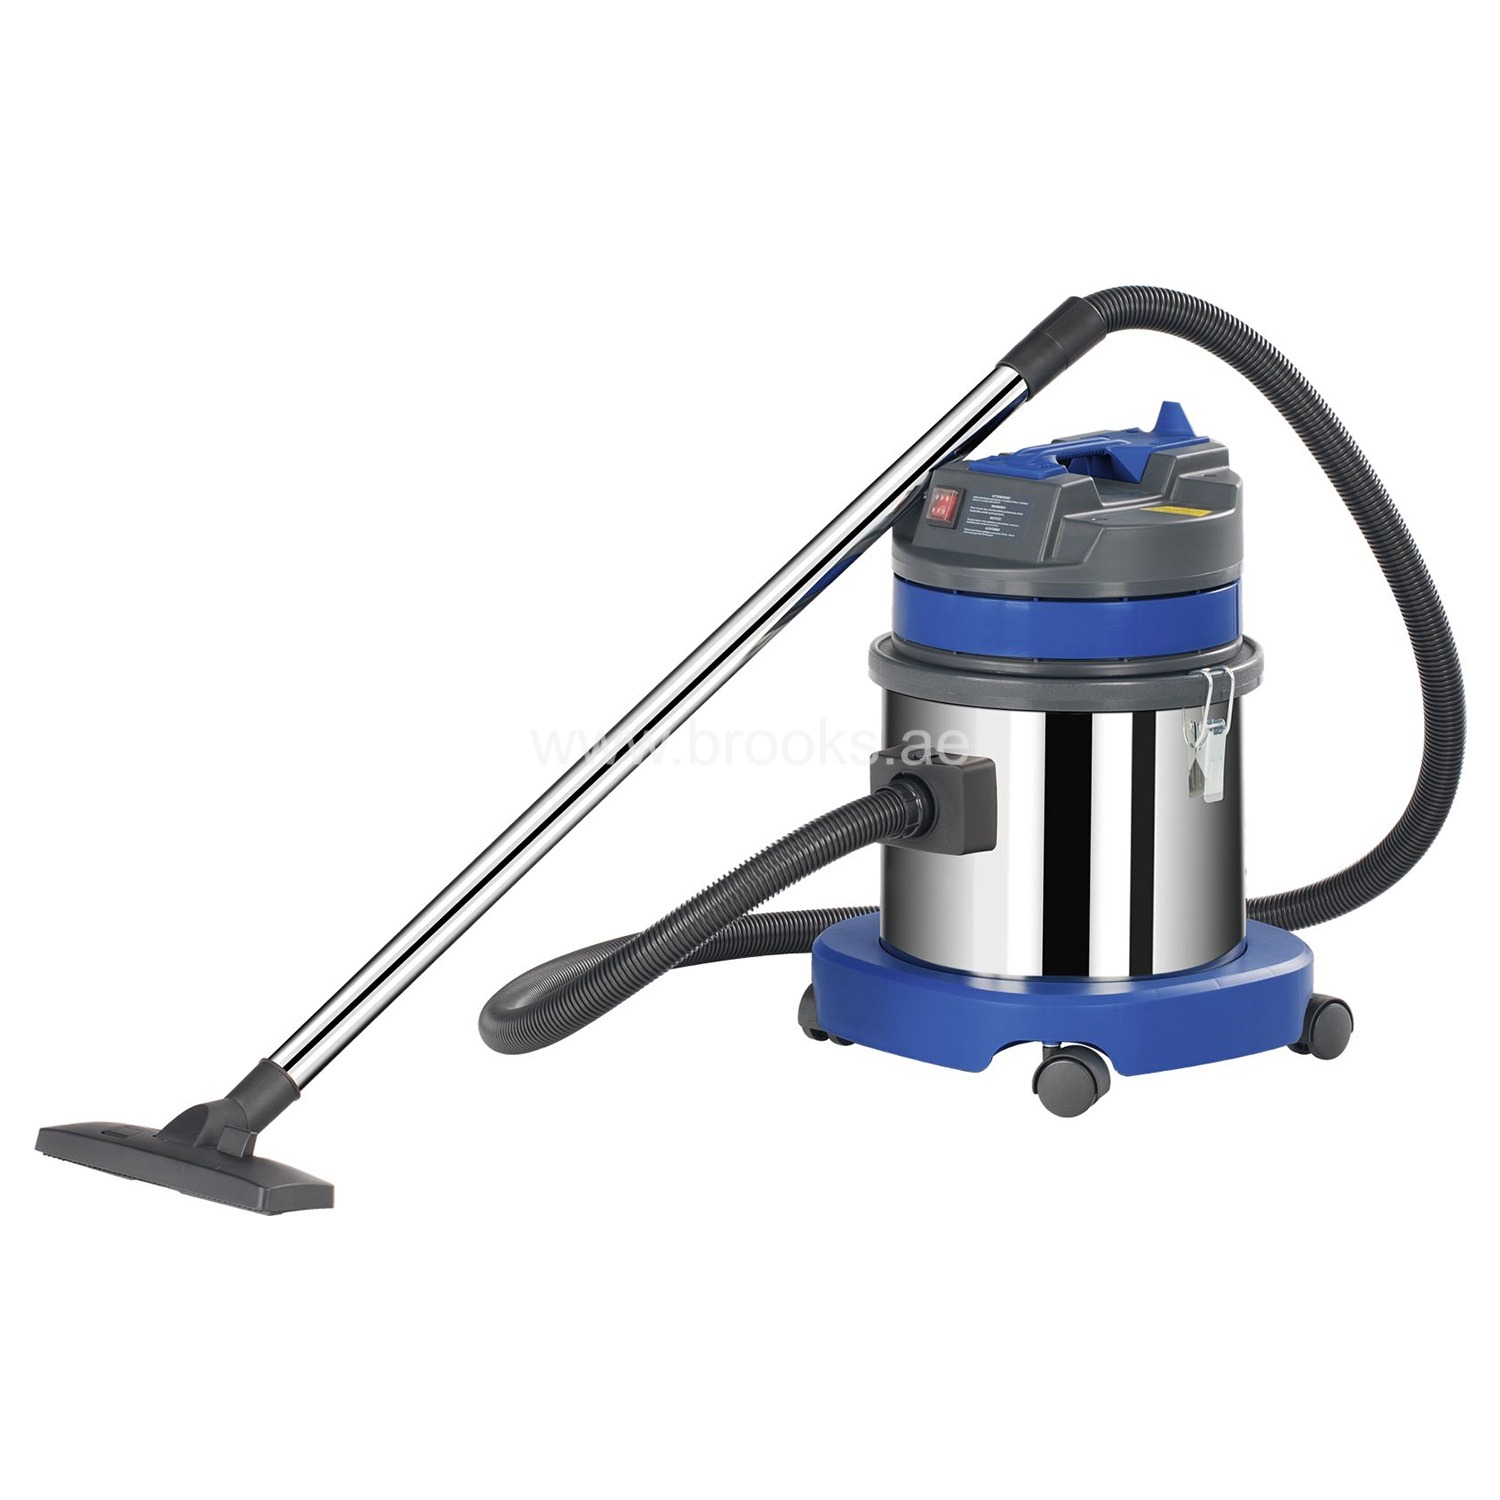 Brooks Wet and Dry Vacuum Cleaner 15Ltr